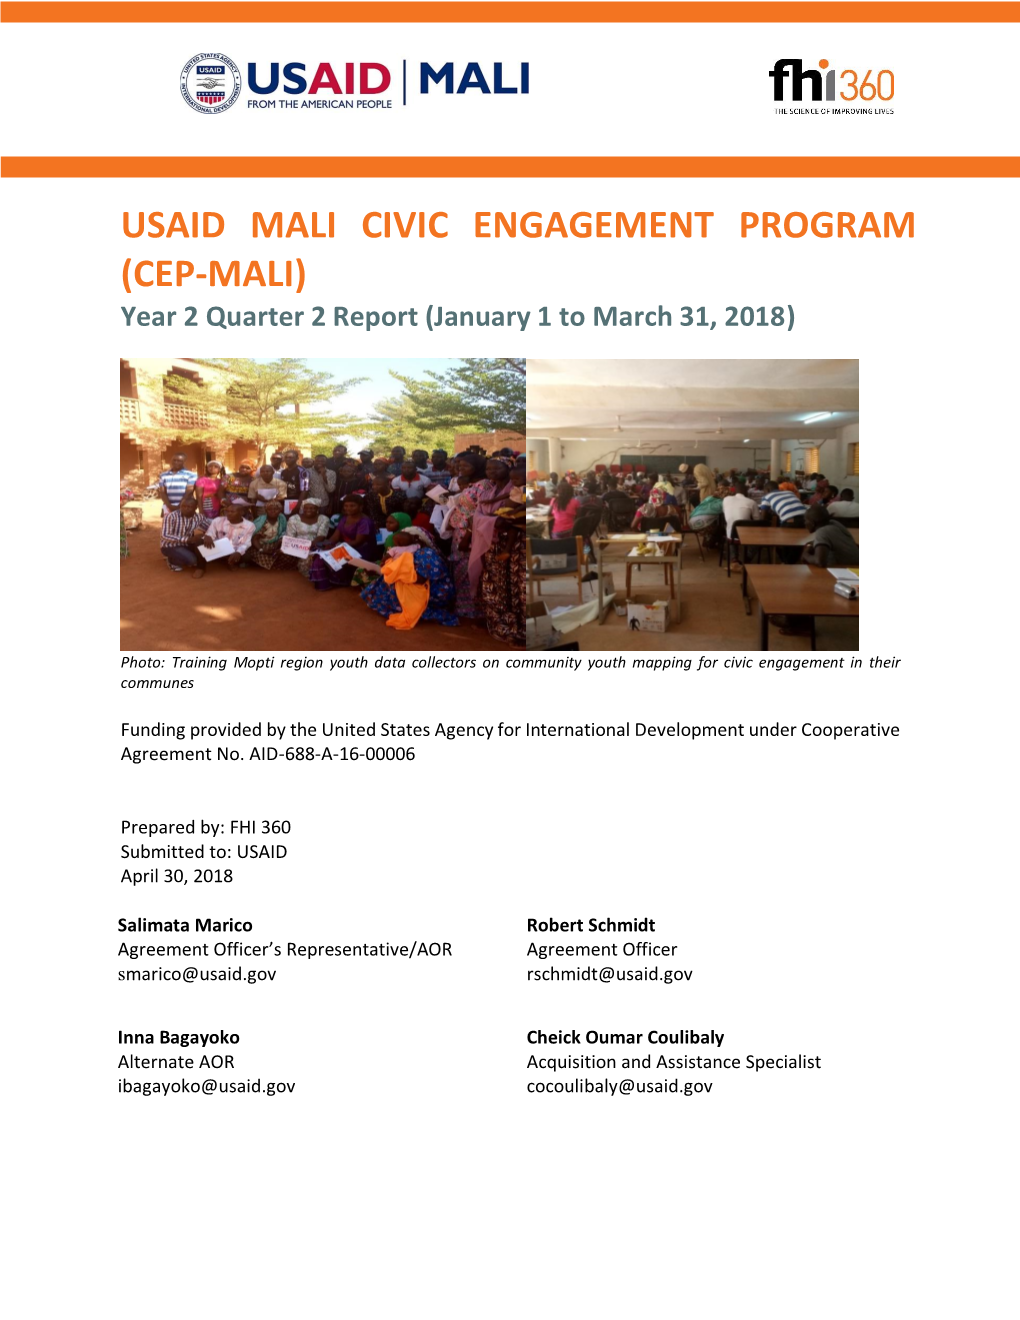 USAID MALI CIVIC ENGAGEMENT PROGRAM (CEP-MALI) Year 2 Quarter 2 Report (January 1 to March 31, 2018)